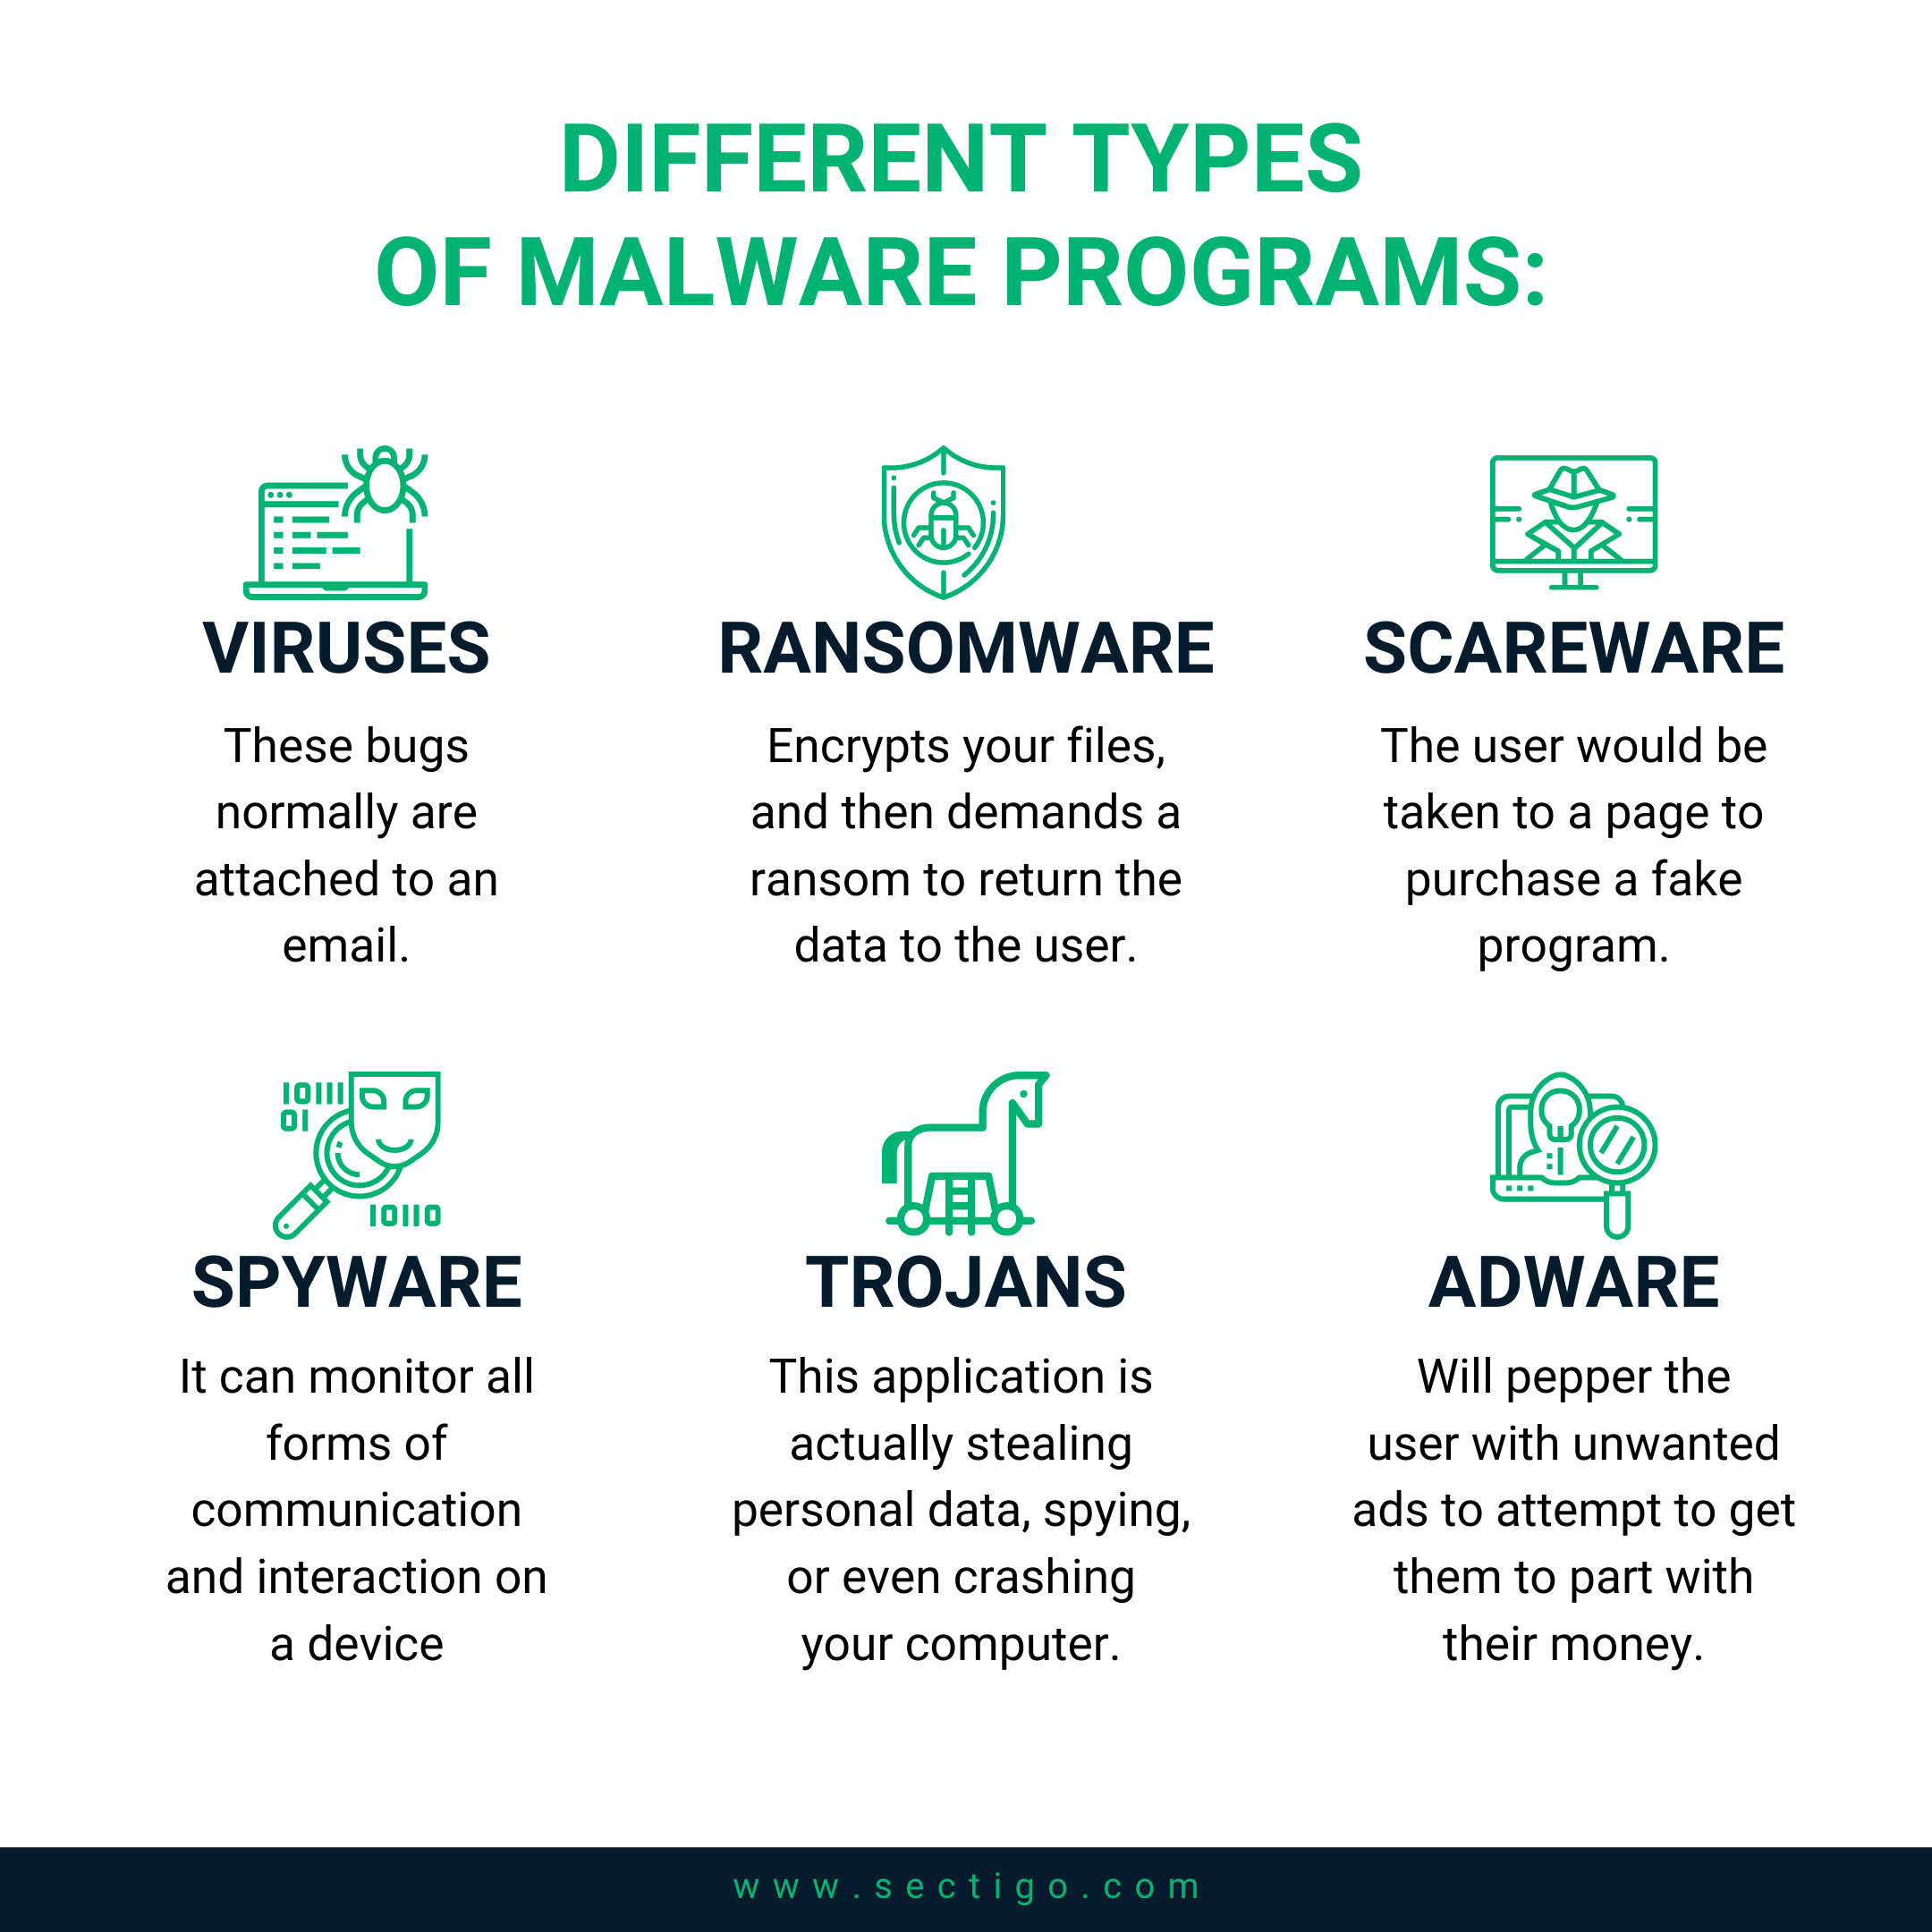 A Definition of Malware